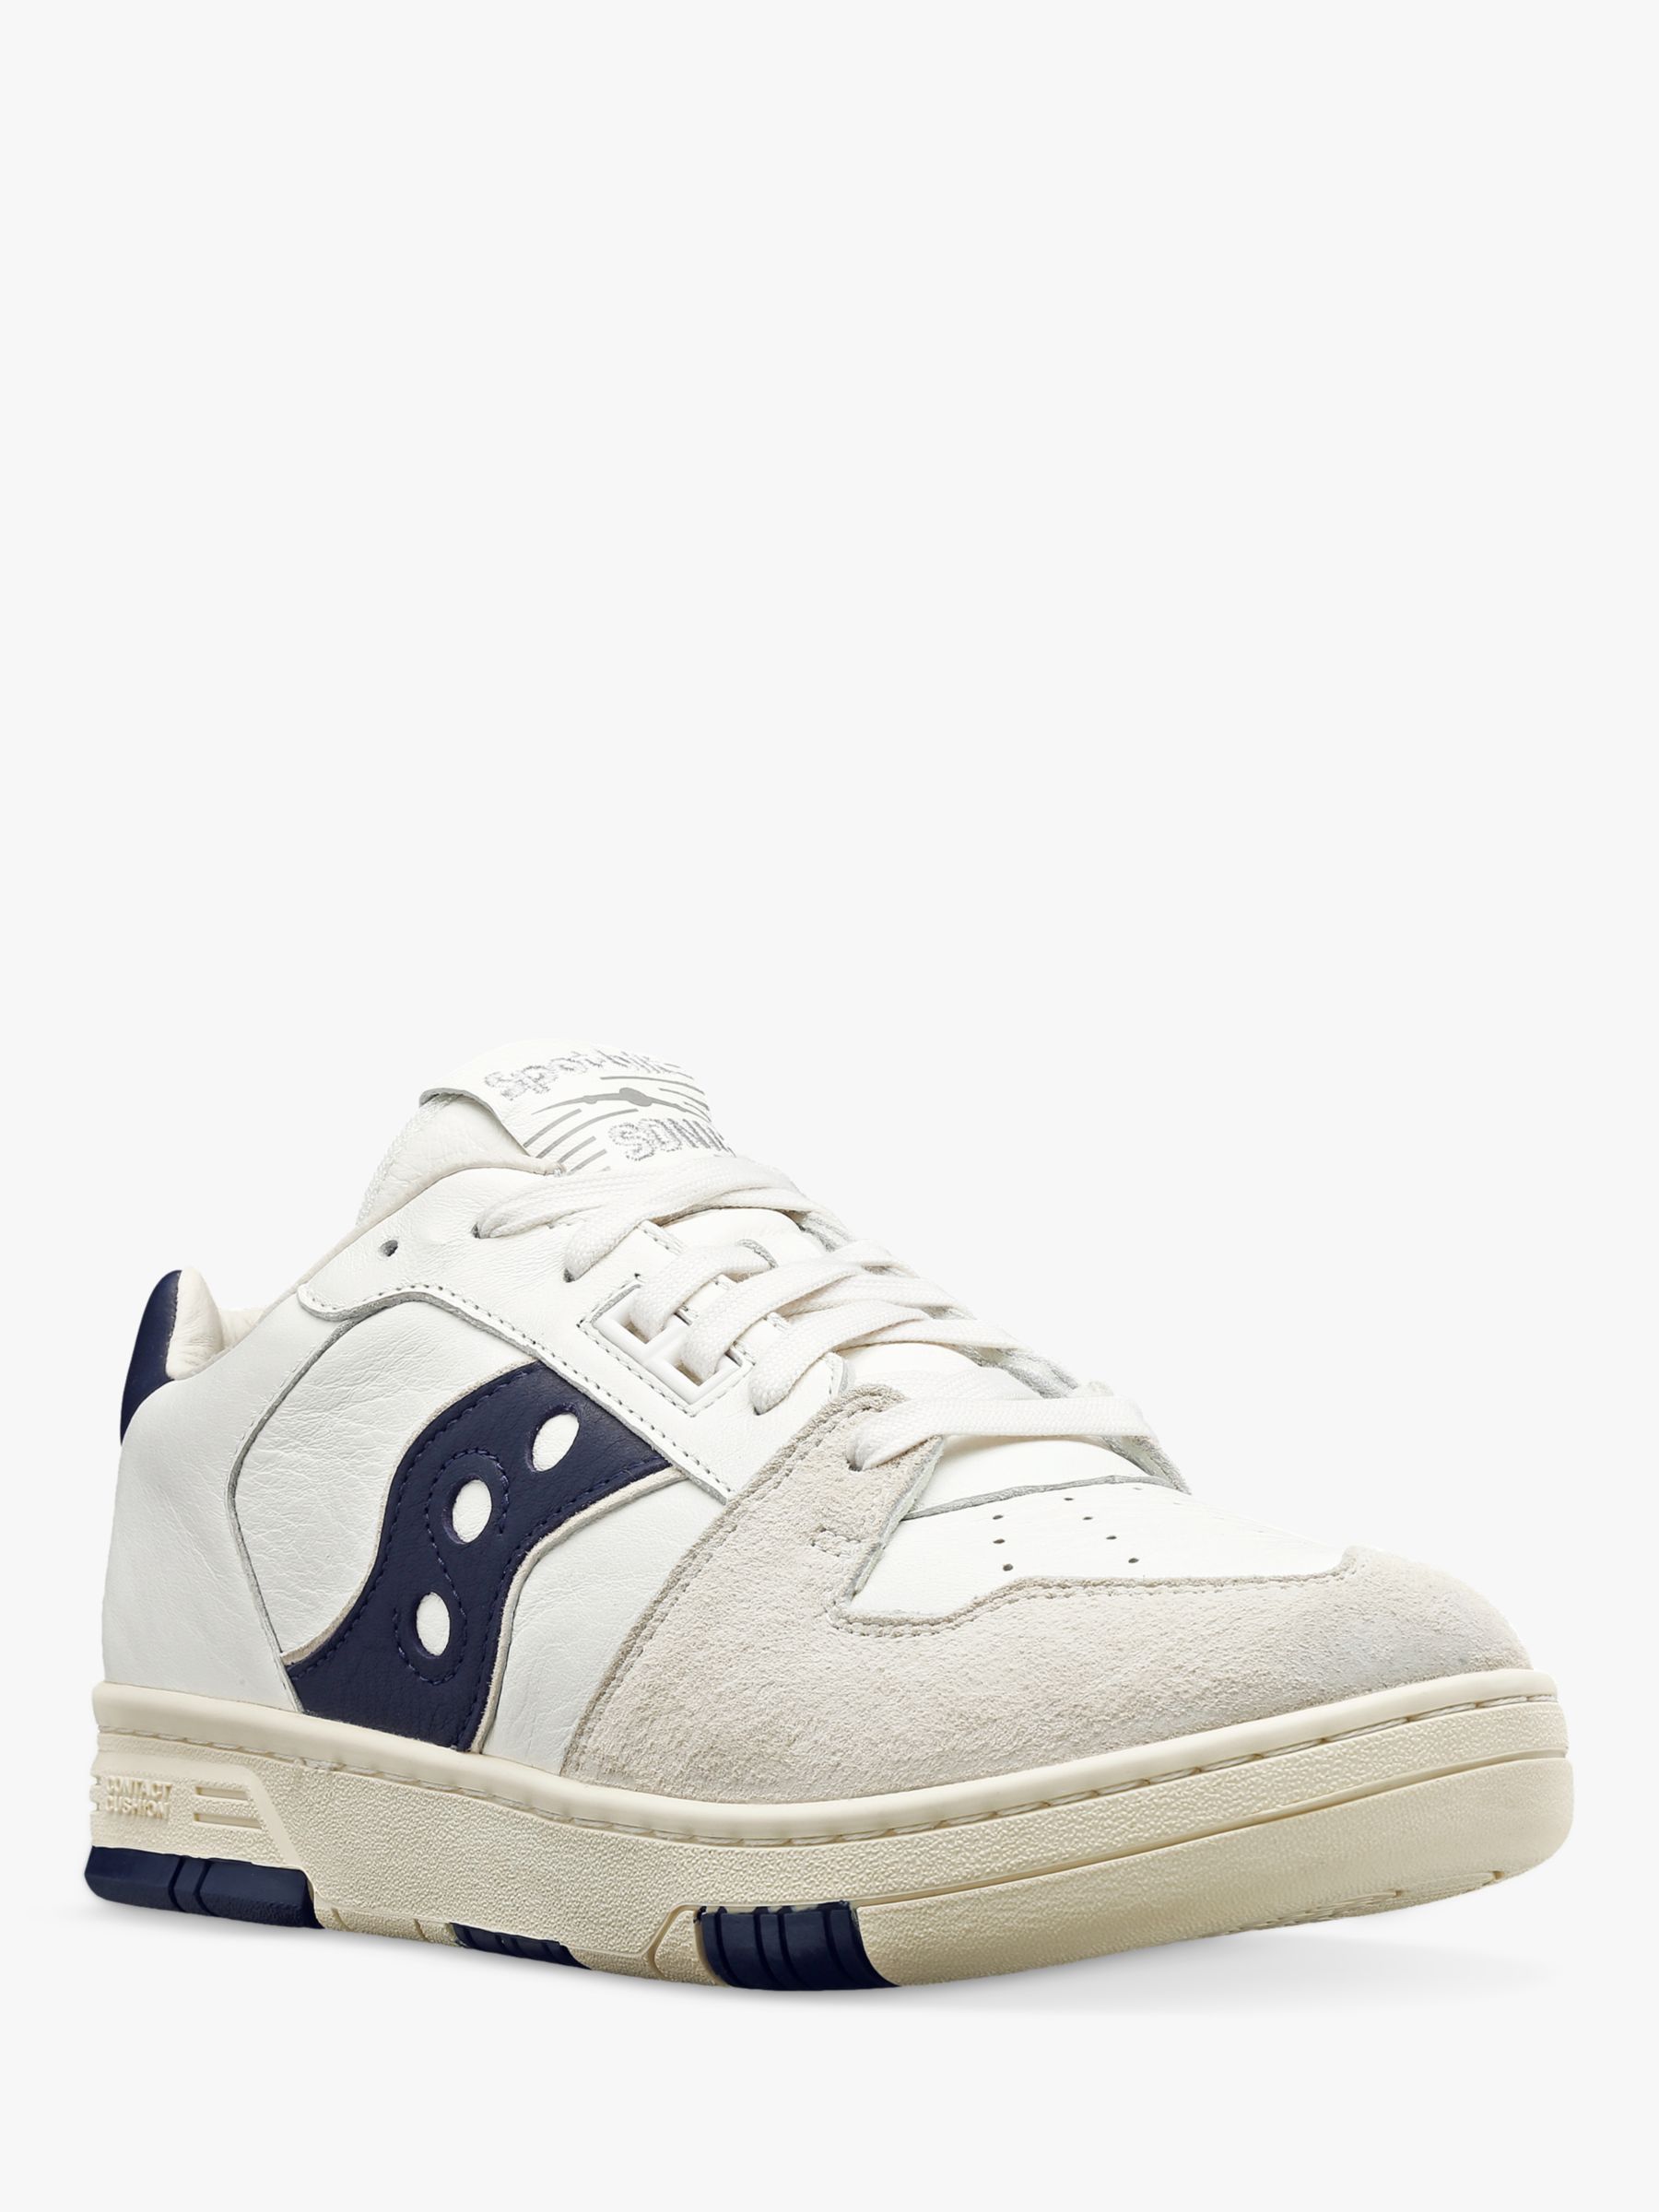 Saucony Sonic Lace Up Trainers, Navy/White, 8